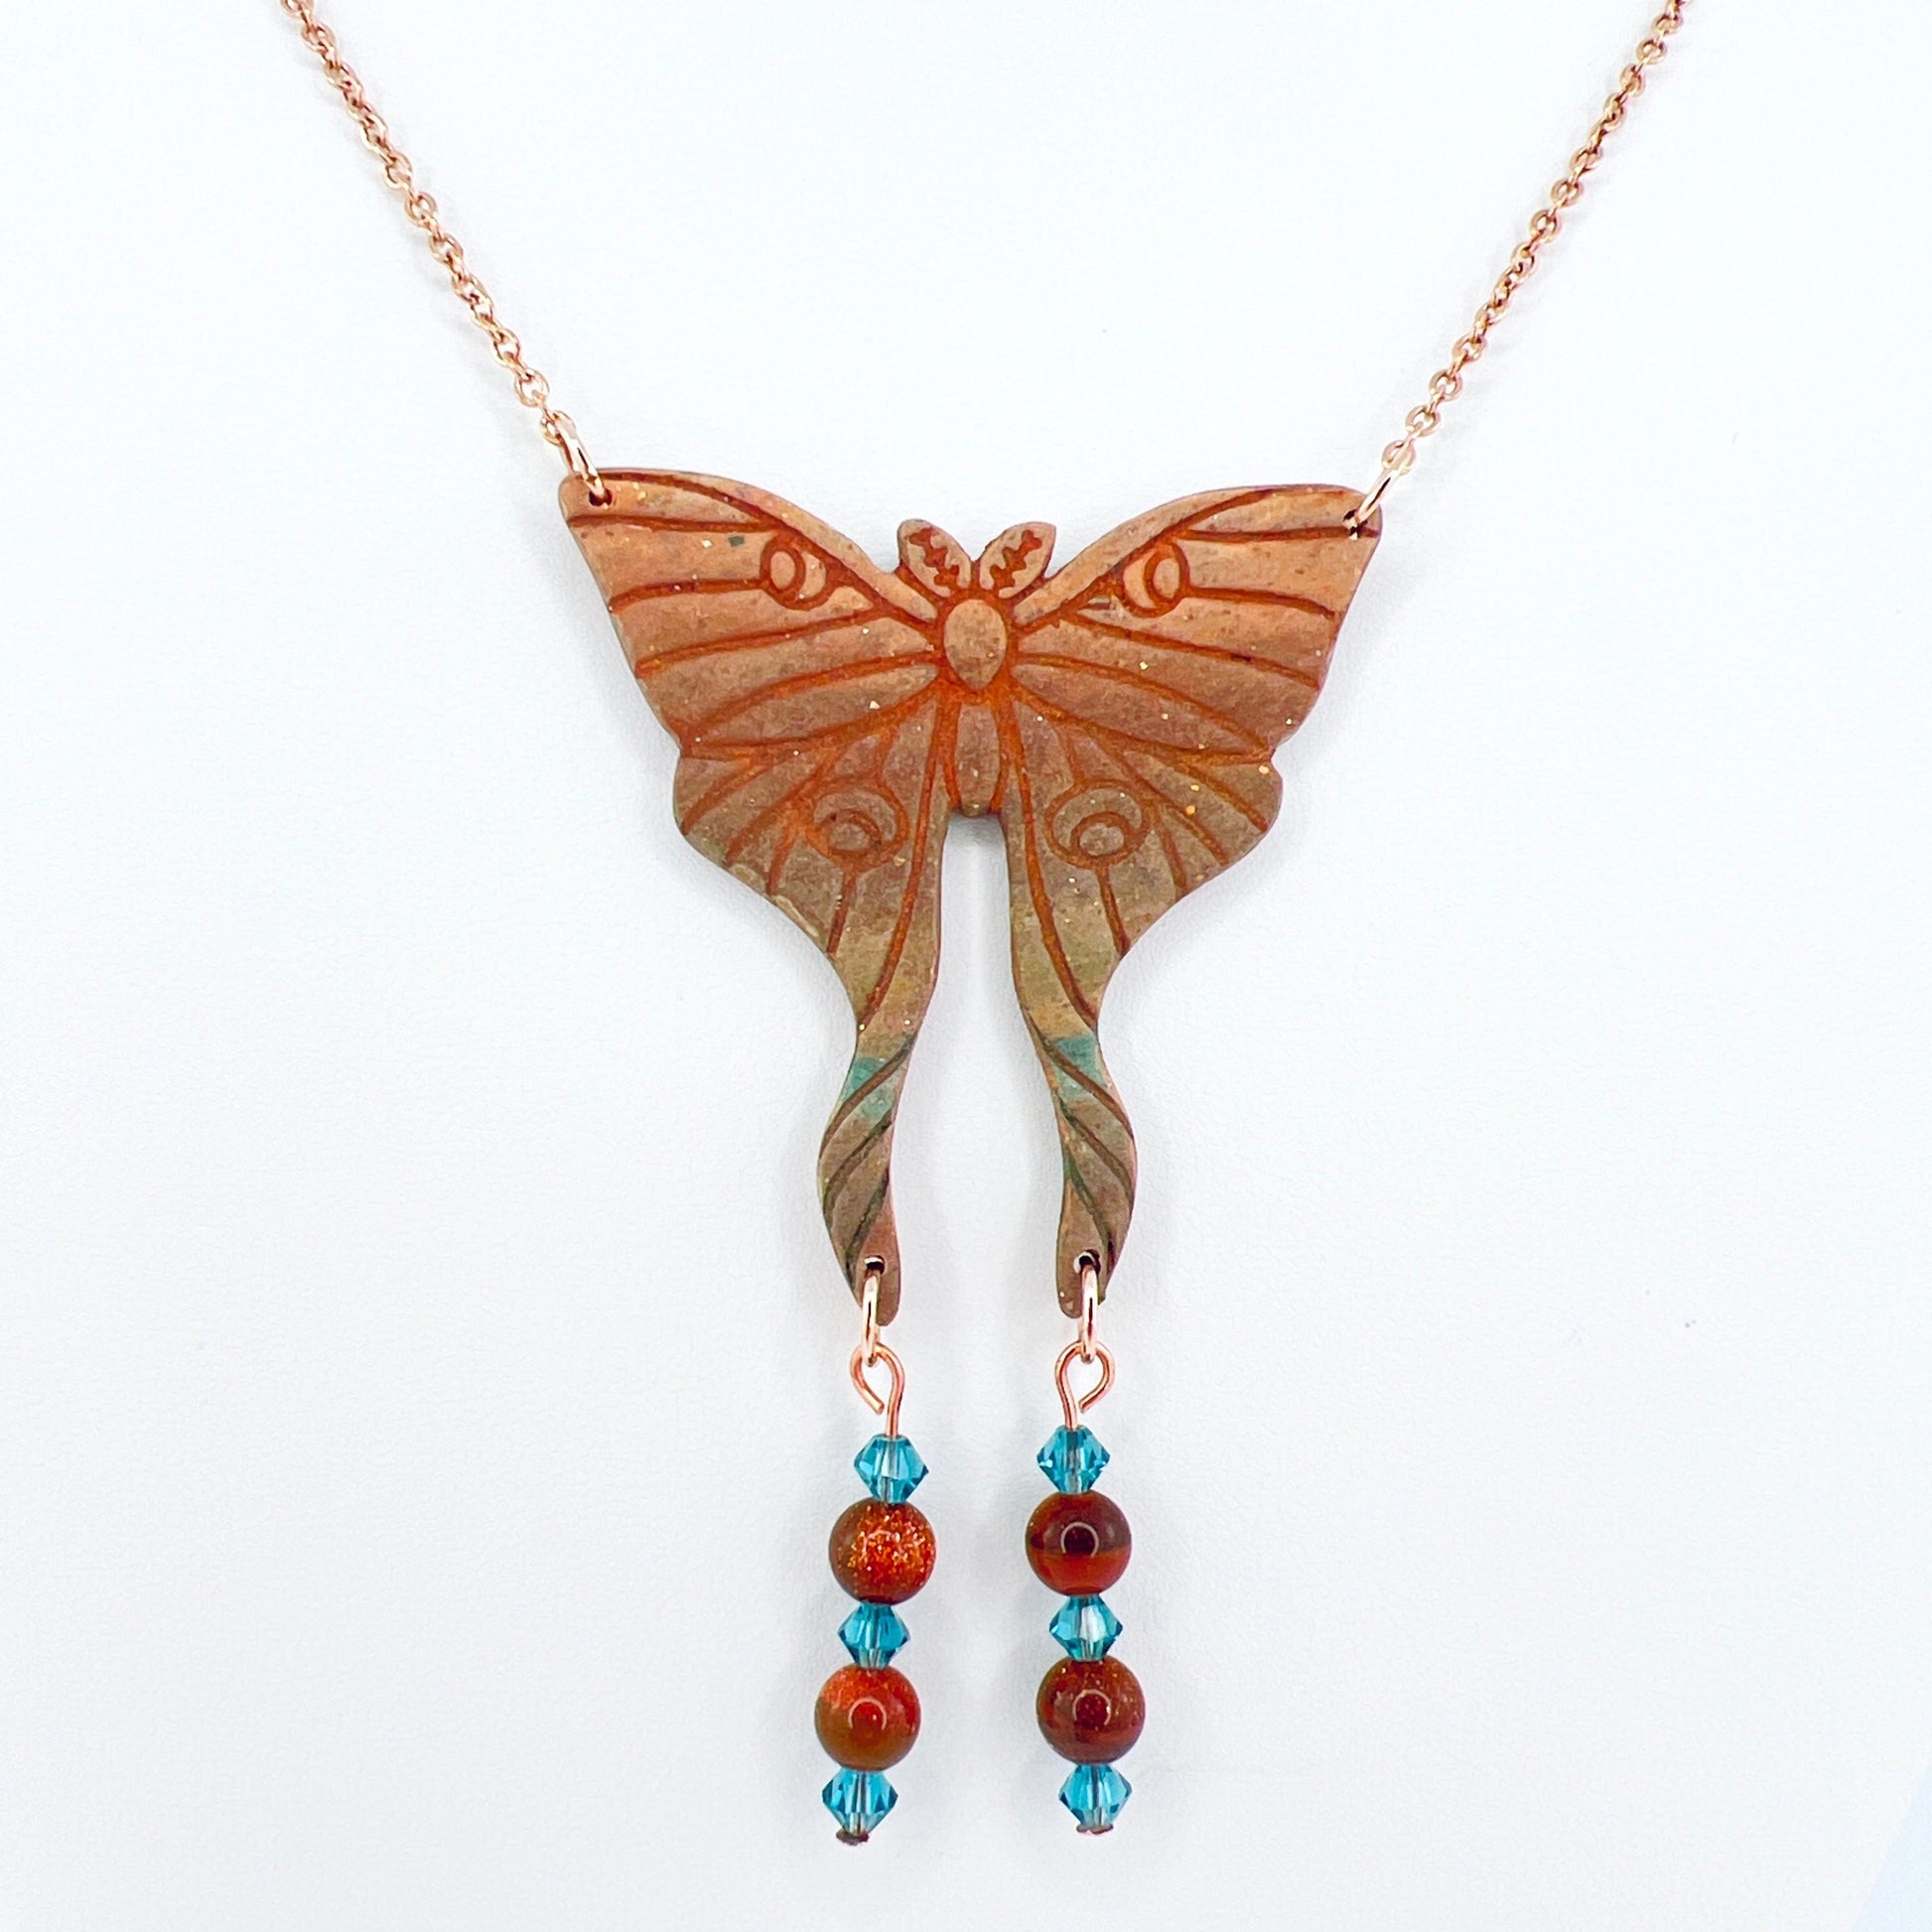 Necklace Brown & Rose Gold with Indicolite Bicone & Goldstone Beads Moth Necklace with Beads